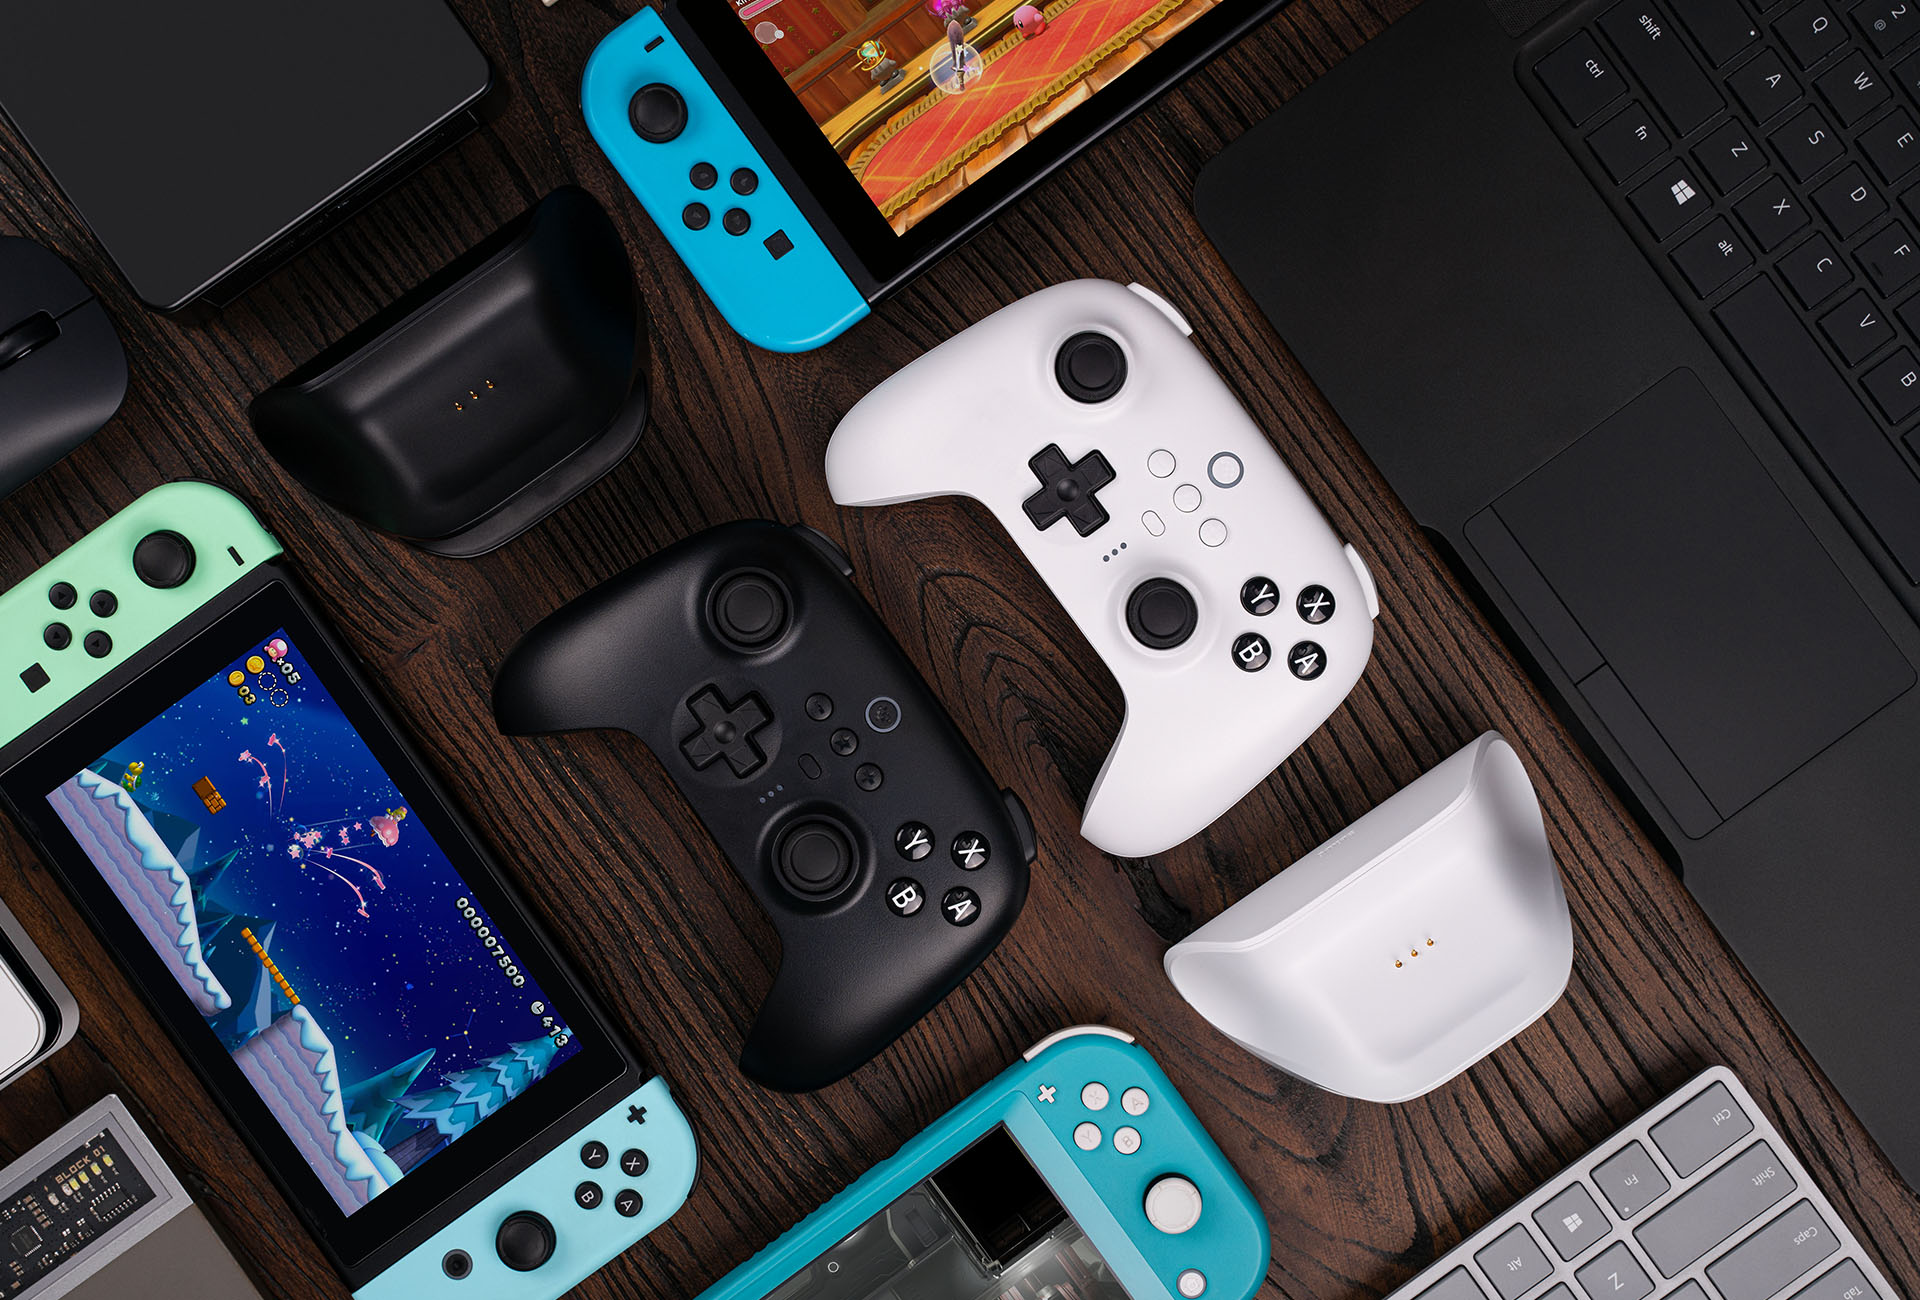 Ultimate Controller with Charging Dock